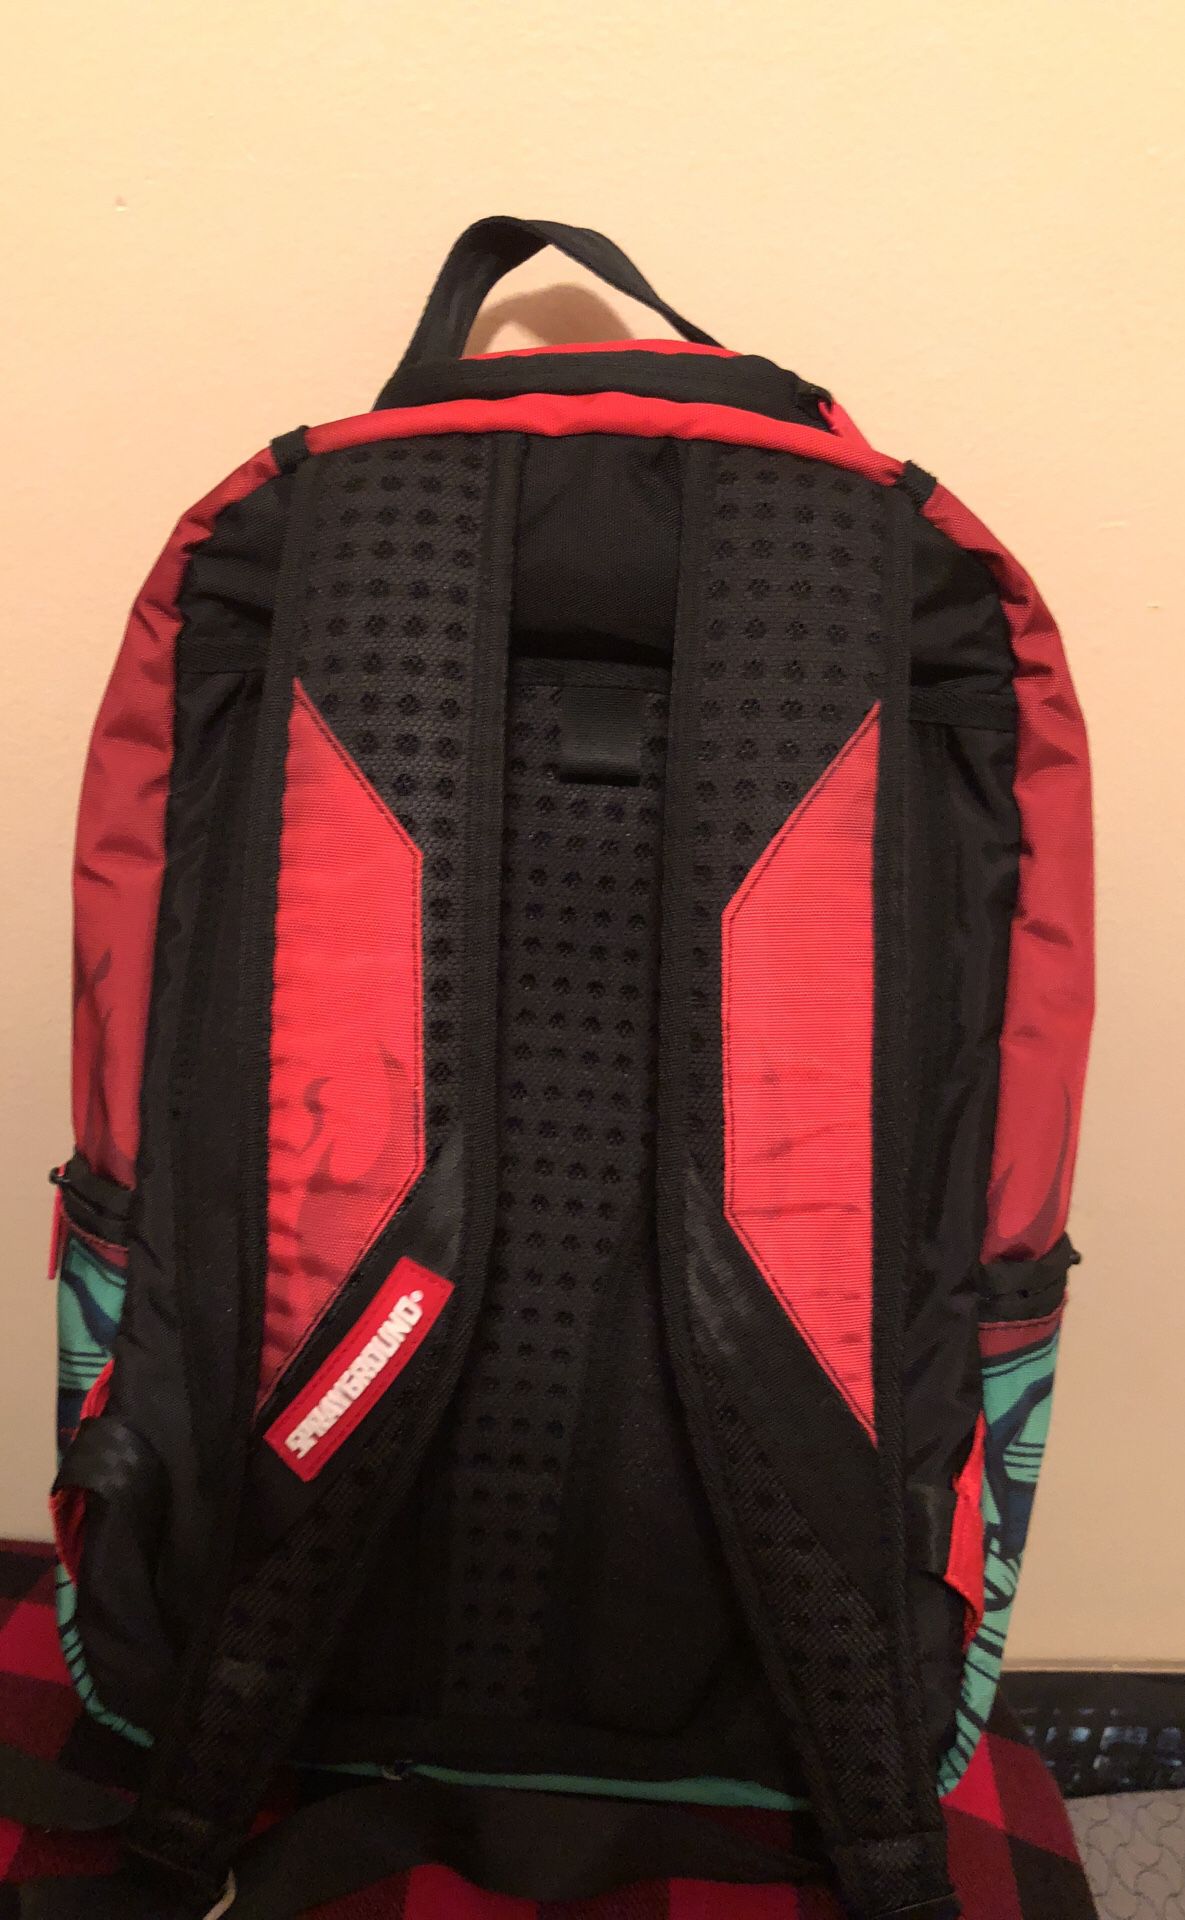 Nba Young Boy Backpack Sprayground for Sale in El Paso, TX